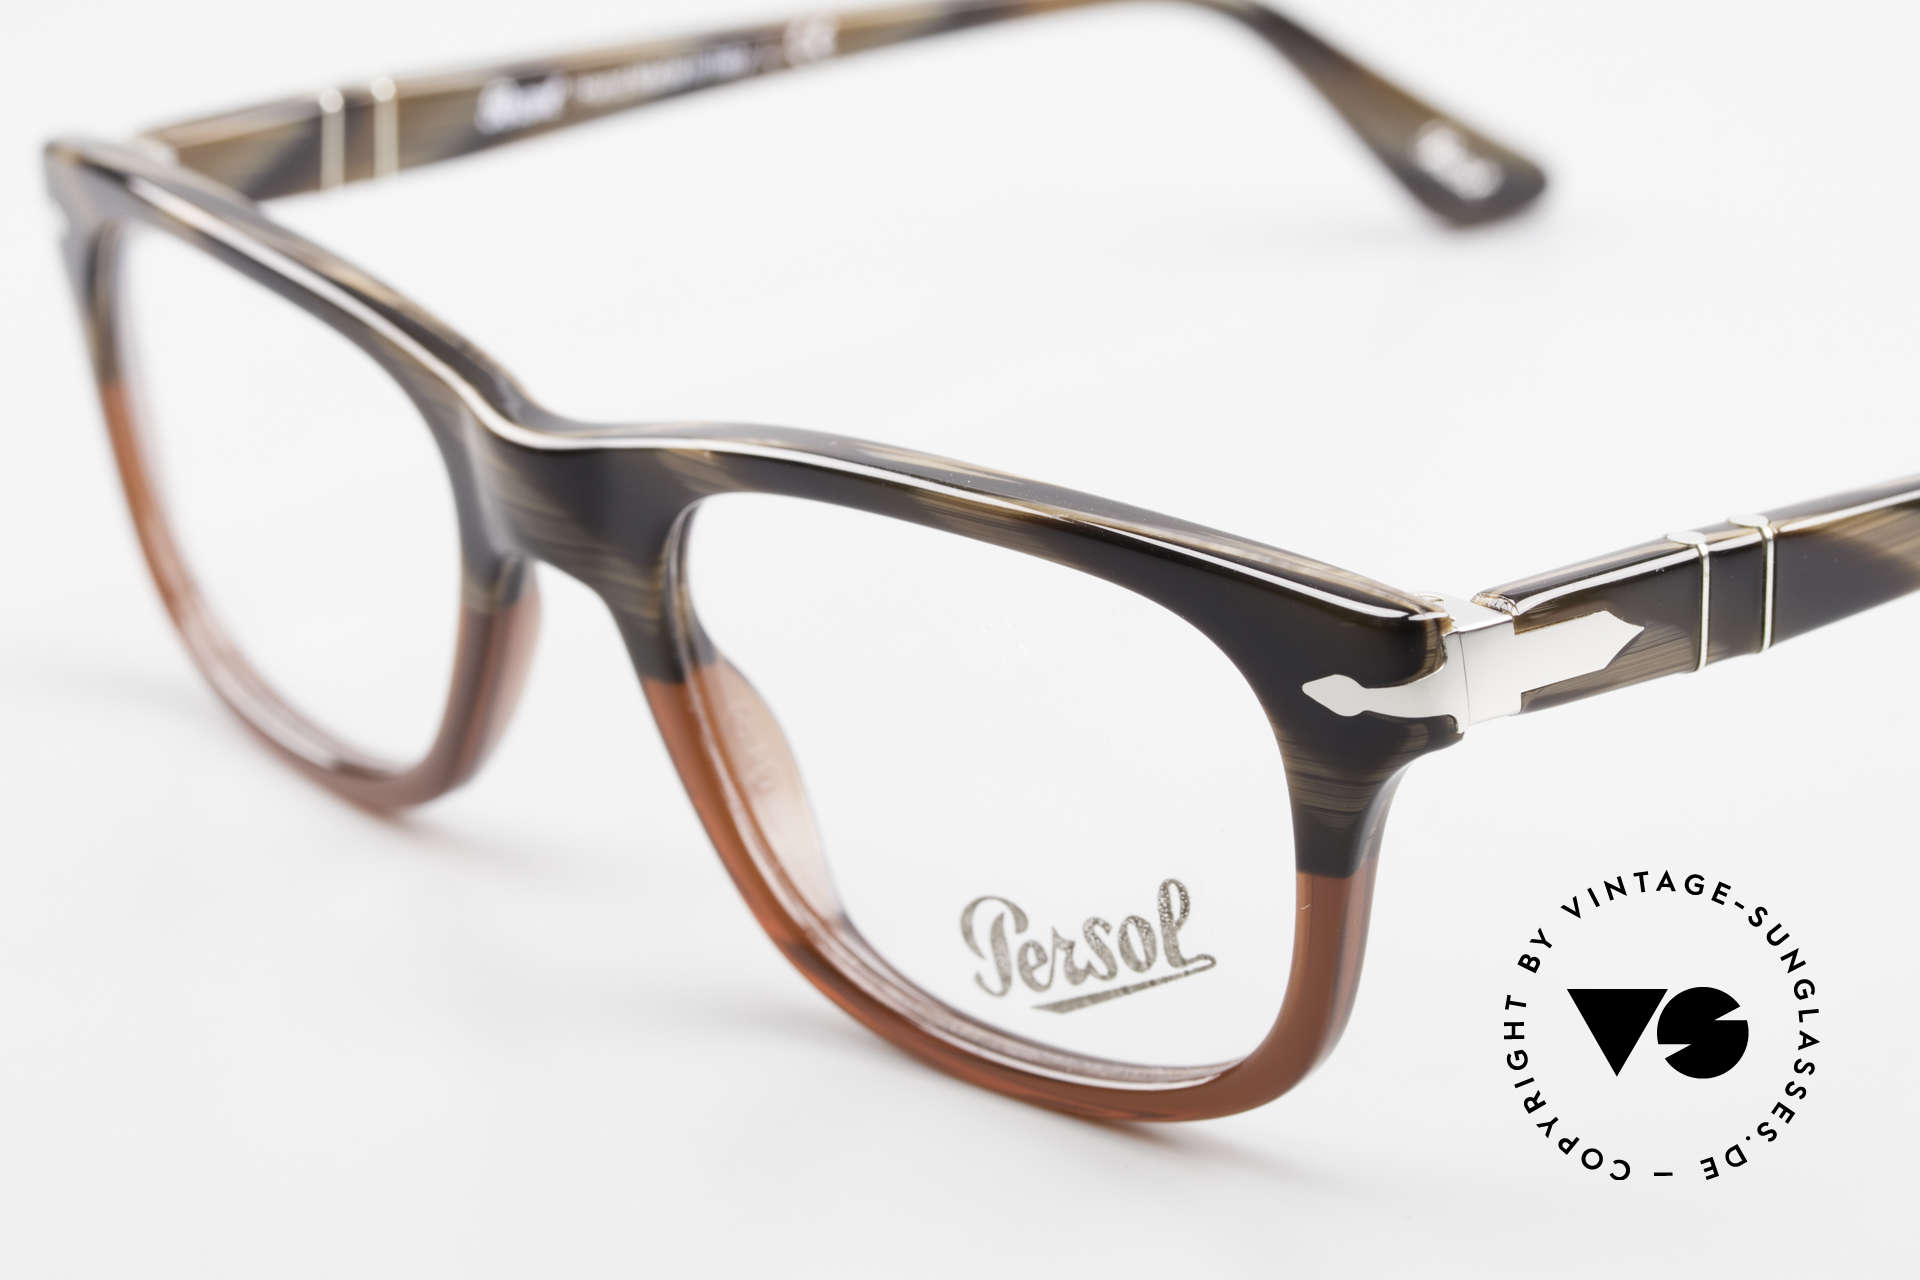 Persol 3029 Small Persol Eyeglasses Unisex, reissue of the old vintage Persol RATTI models, Made for Men and Women